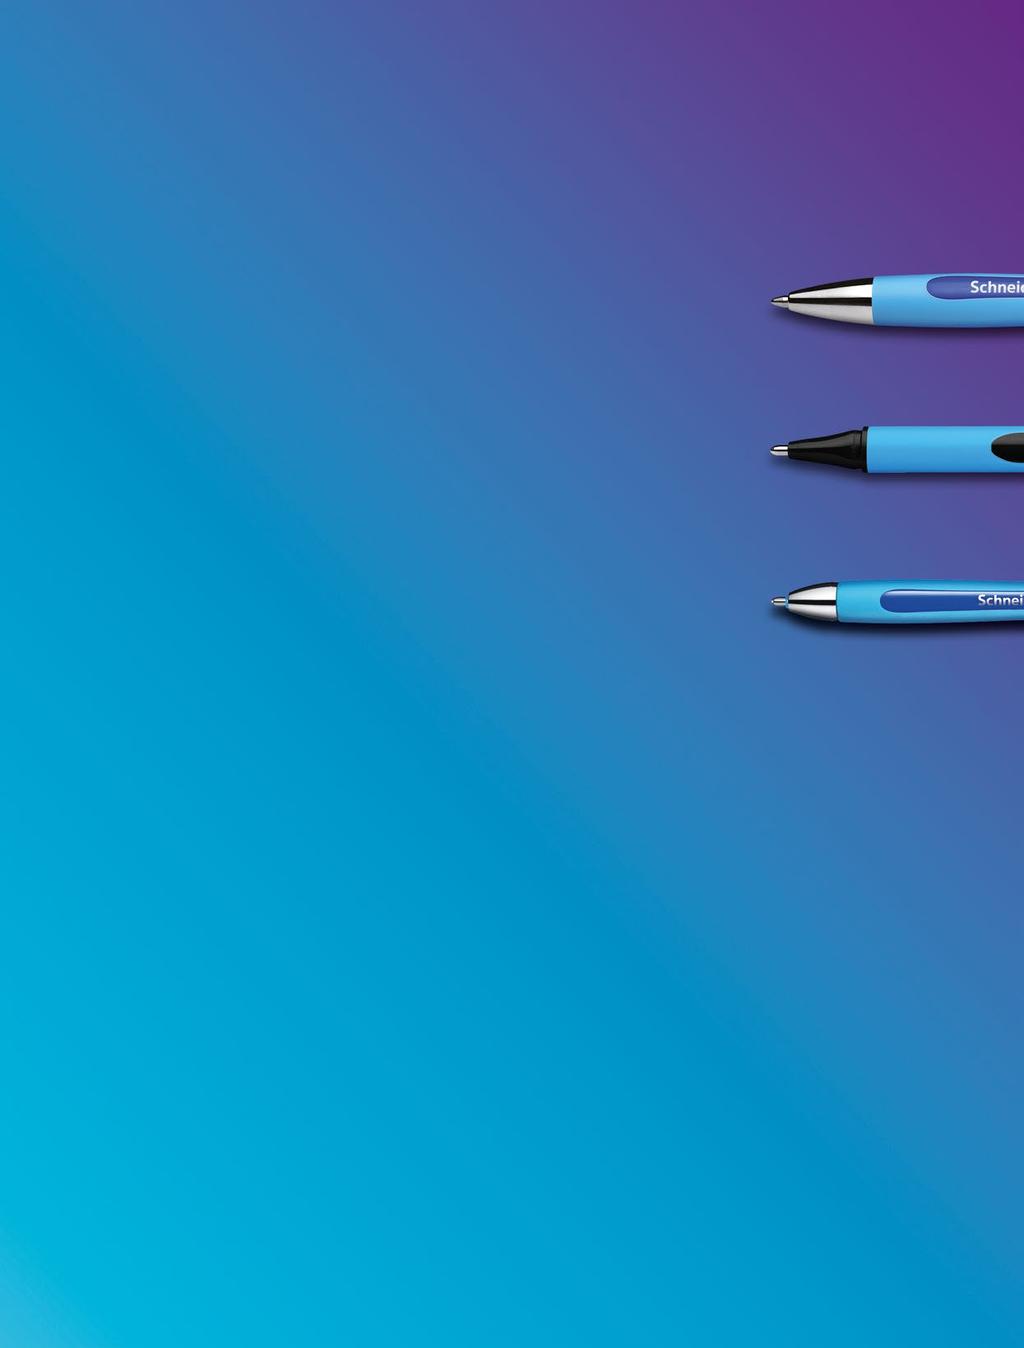 Ballpoint pens Schneider ballpoint pens are designed for everyday use. Functional design, high quality and a long shelf life are especially important to us.